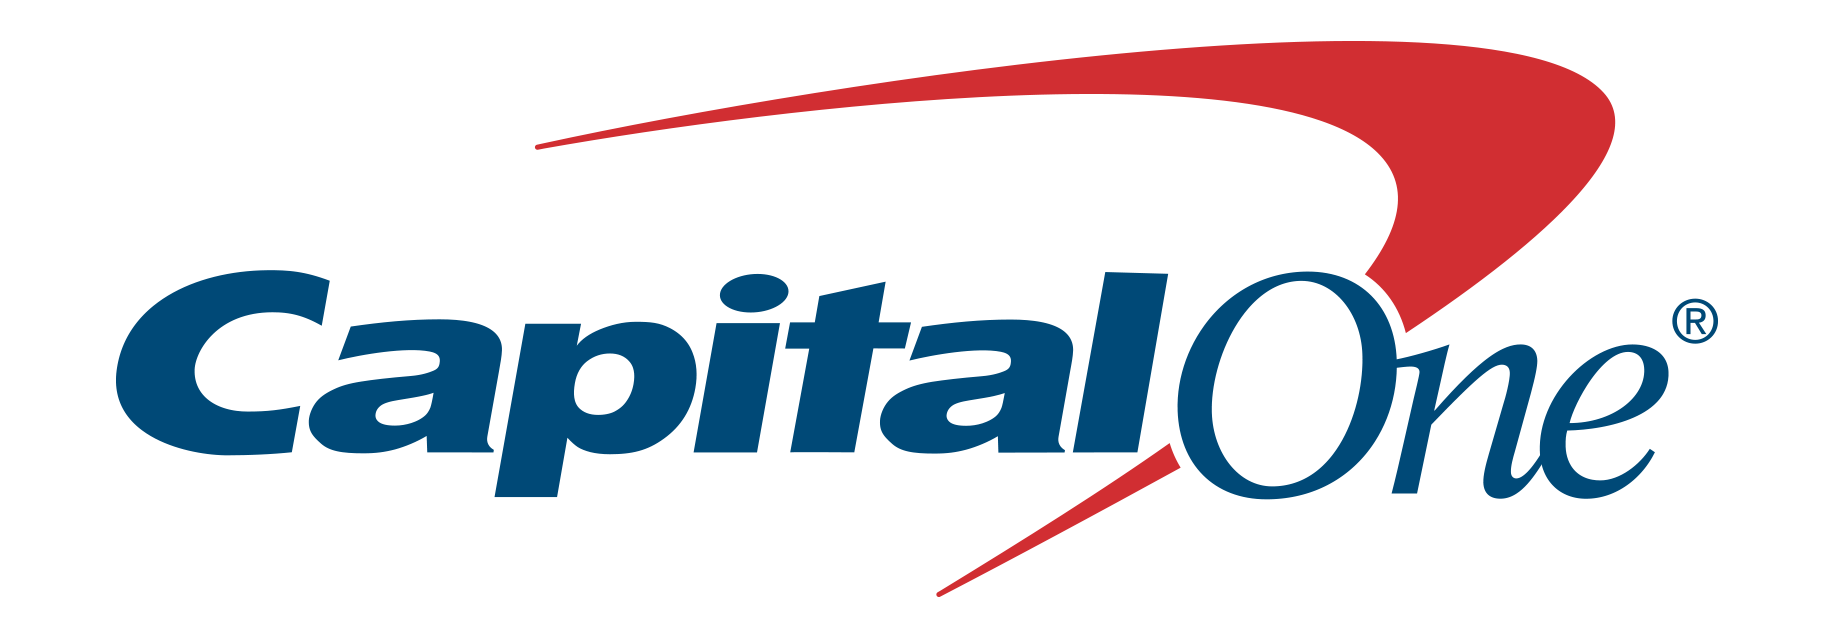 capital-one-logo-1.png